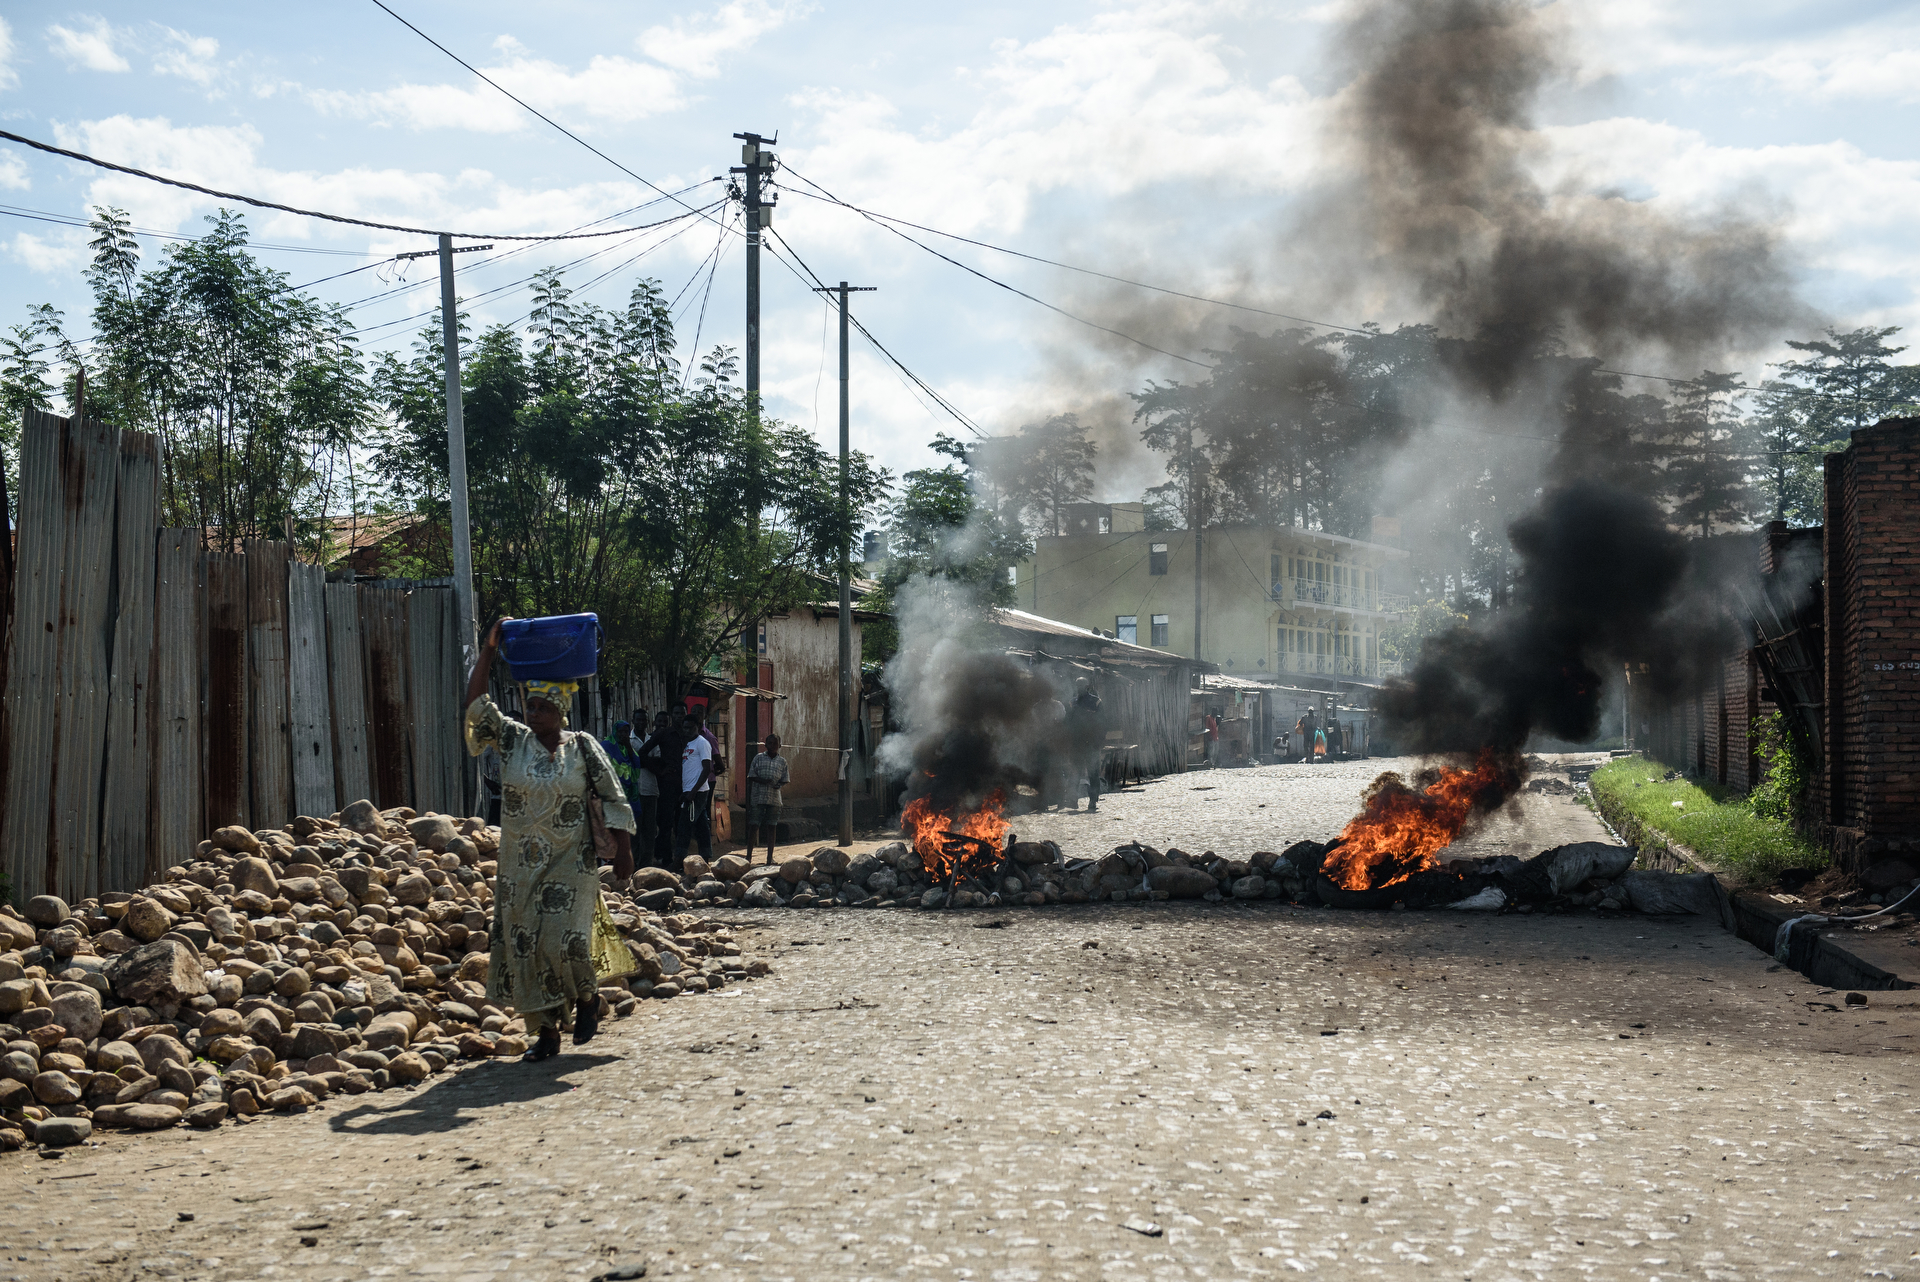  A woman carries a bundle past a barricade fire on a side street in Bujumbura, Burundi on 14 May. Following the 13 May announcement that president Nkurunziza was overthrown, putschistes and military fought over key locations such as the state broadca